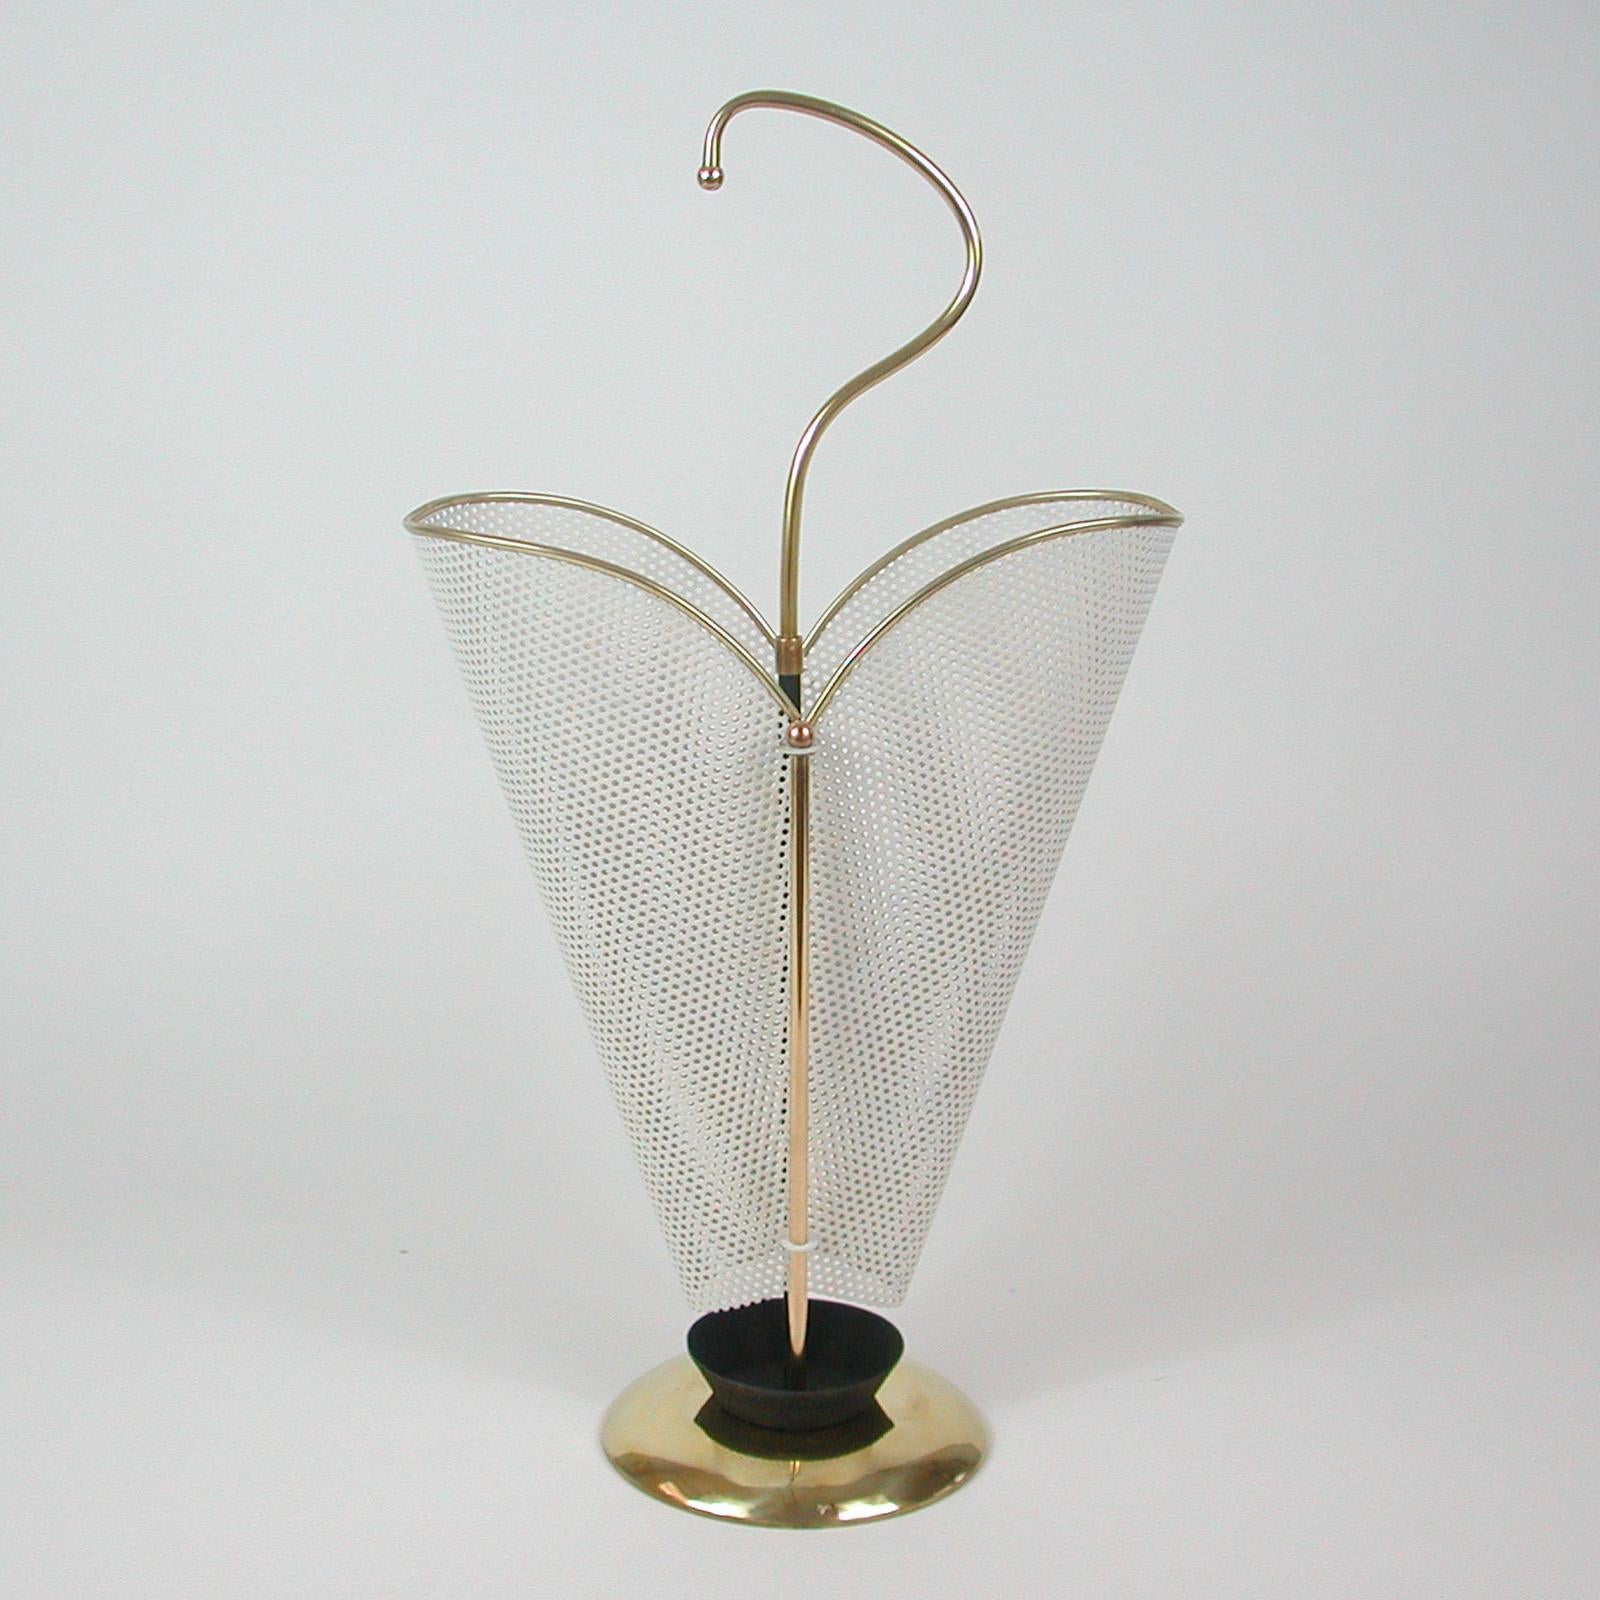 This elegant heart shaped midcentury umbrella stand was designed and manufactured in France in the 1950s in the manner of designer Mathieu Matégot. It features off white lacquered iron mesh or perforated metal, a brass base and a stylish brass